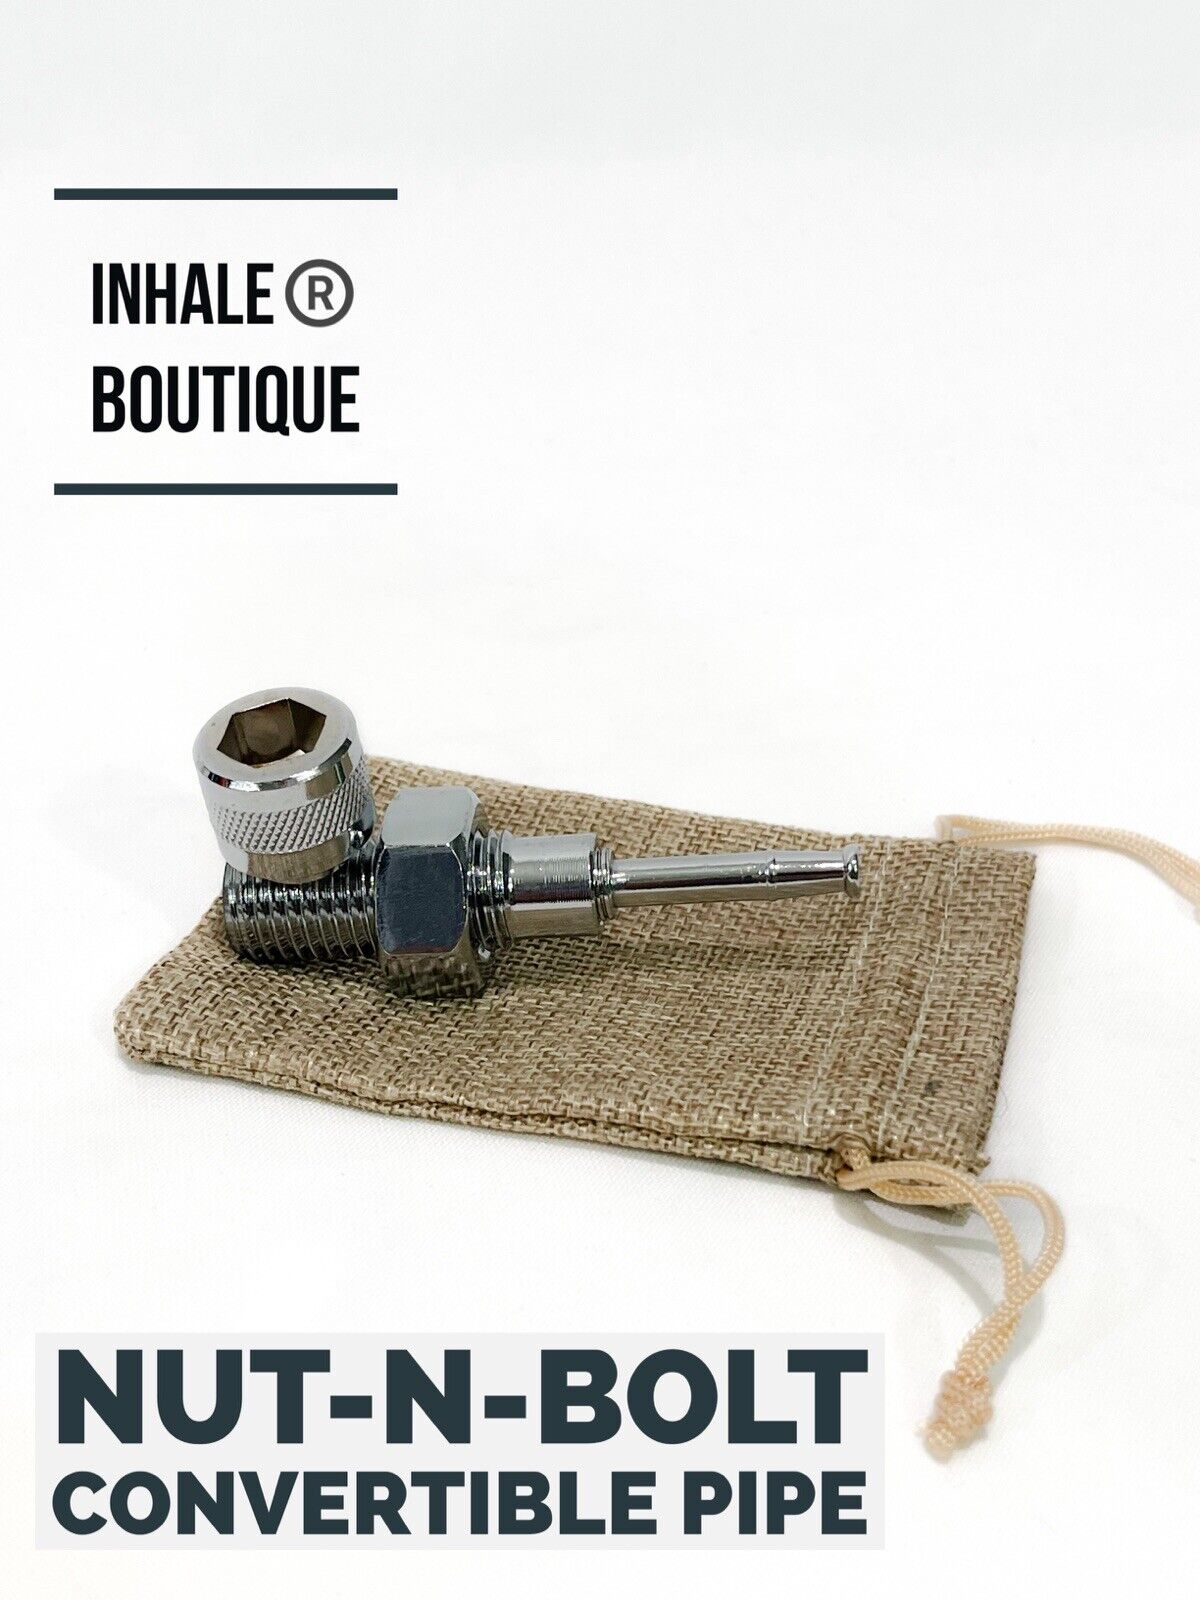 Collectible metal smoking pipe / Nut-N-Bolt Convertible / In A Burlap Pouch